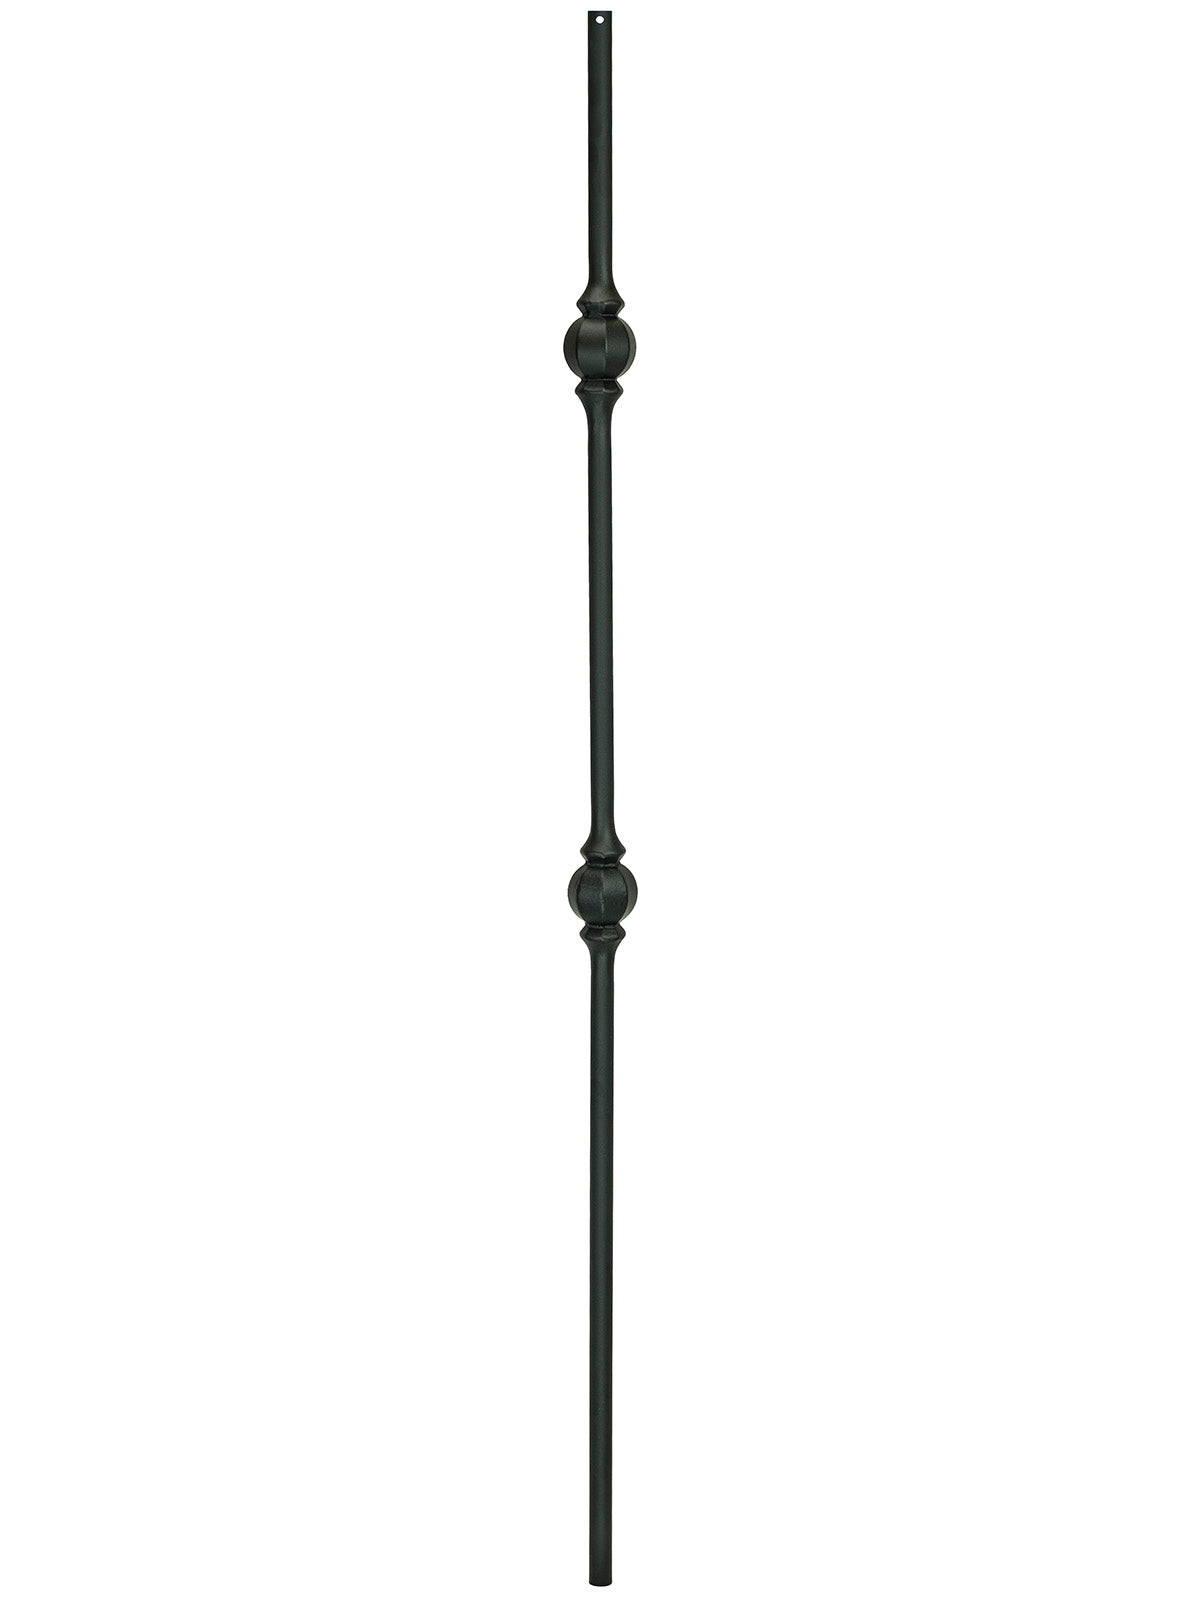 Iron Baluster 2GR23 - 5/8" Round - Double Ball